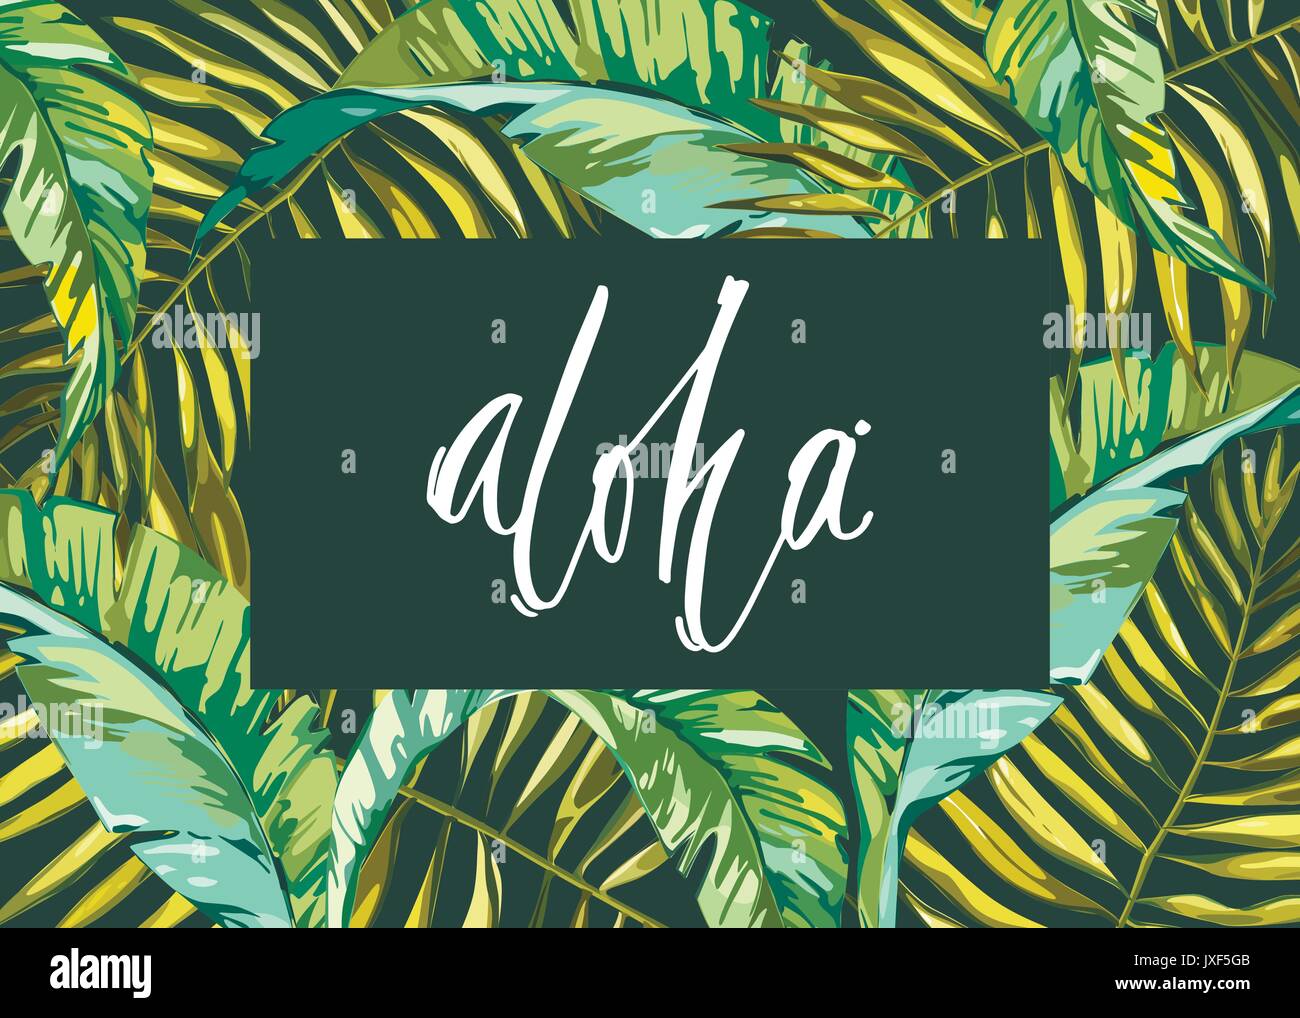 Tropical leafs composition background. Flat shapes hand drawn. Green on black with bird of plumeria flowers. Word- aloha. EPS 10 Stock Vector